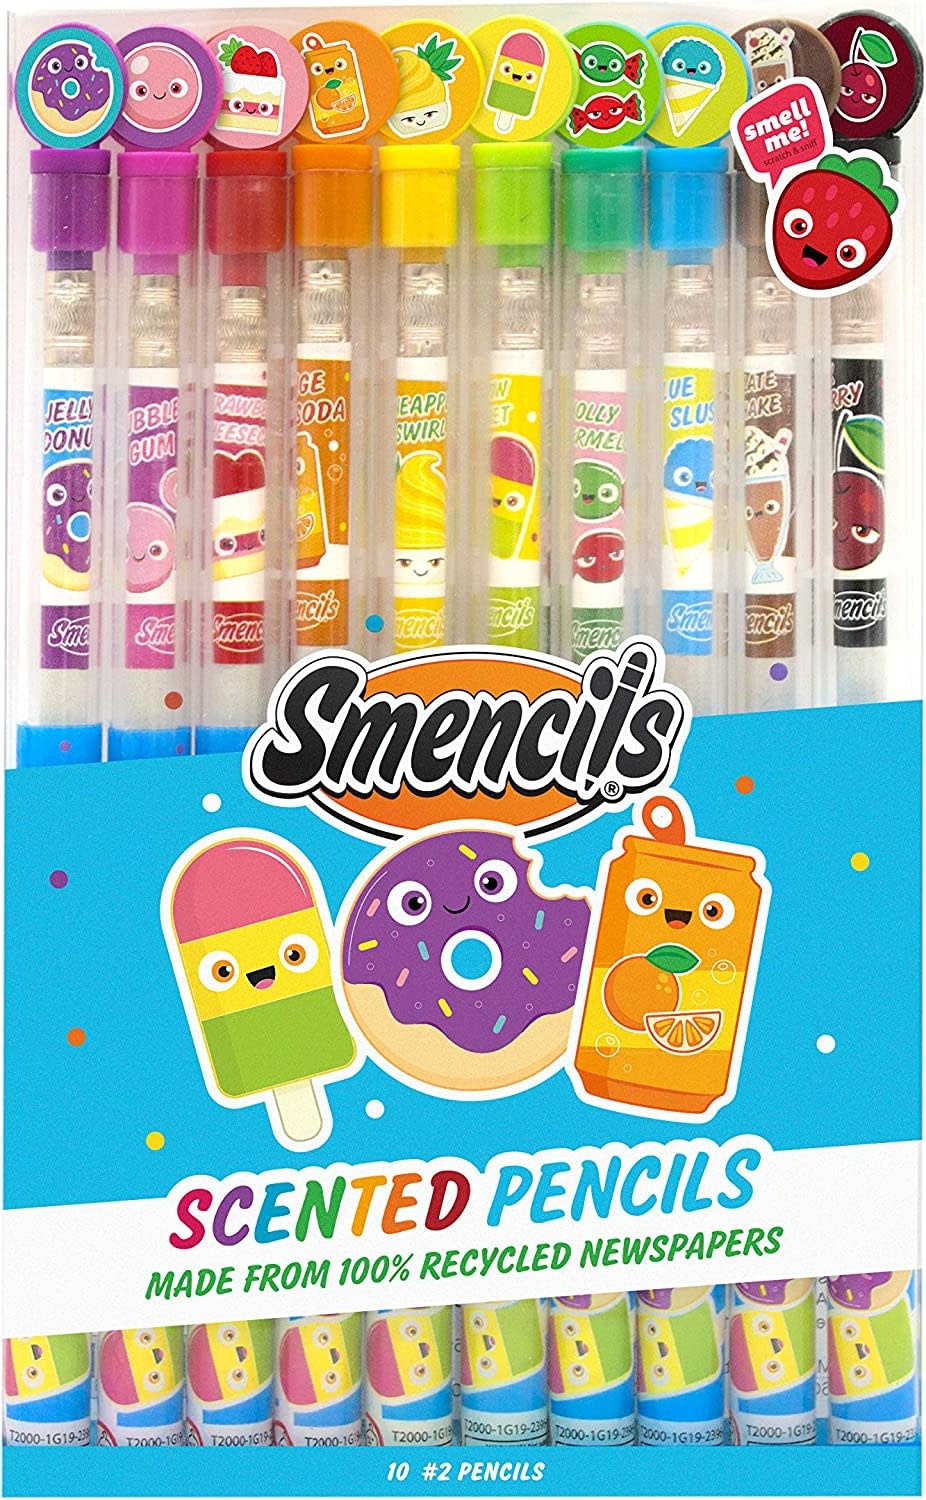 Colored Smencils (2 Pack) - Gourmet Scented Colored Pencils made from  Recycled Newspapers, 10 Count, Gifts for Kids, School Supplies, Classroom